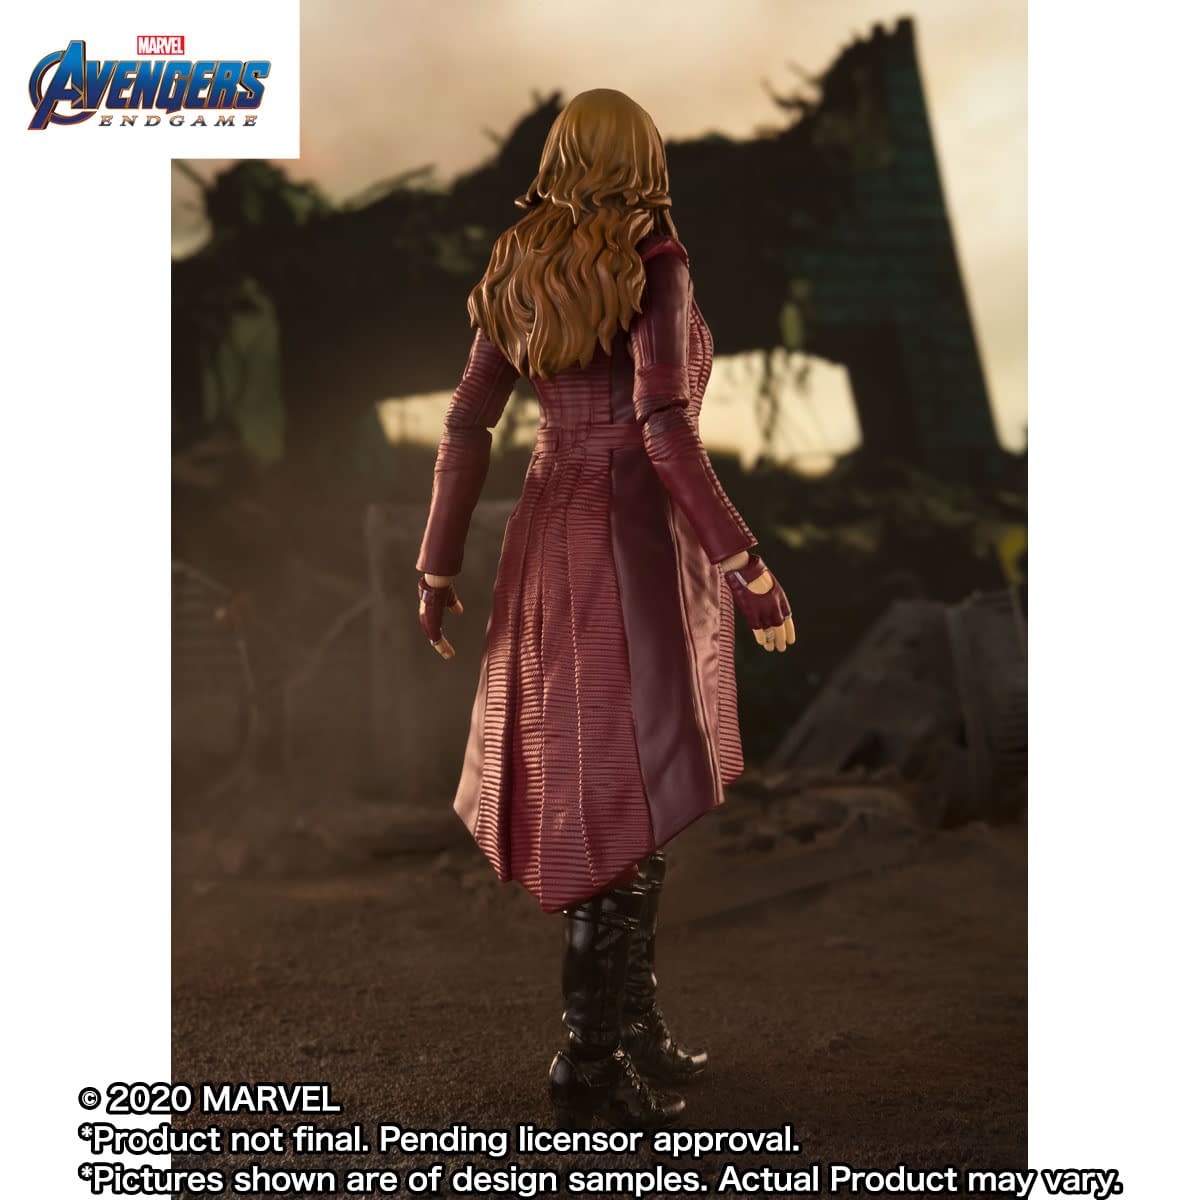 S.H. Figuarts - Avengers: Endgame: Scarlet Witch - P-Bandai Exclusive